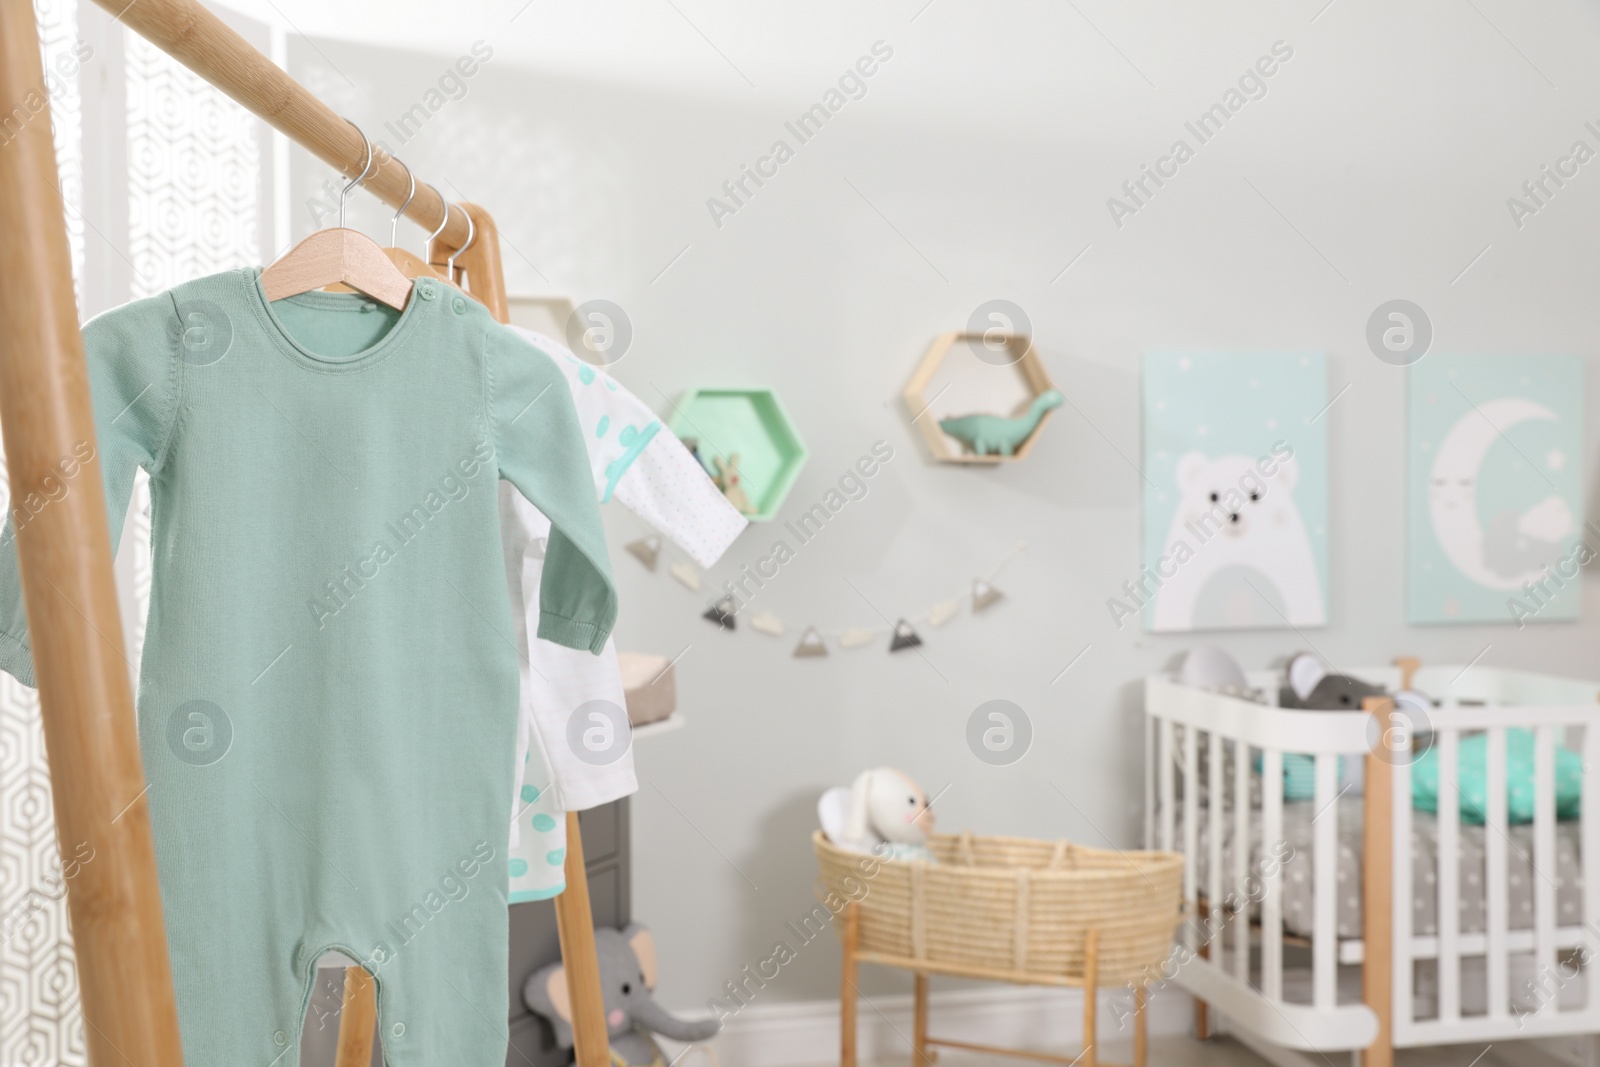 Photo of Cozy baby room interior, focus on wooden clothes rack